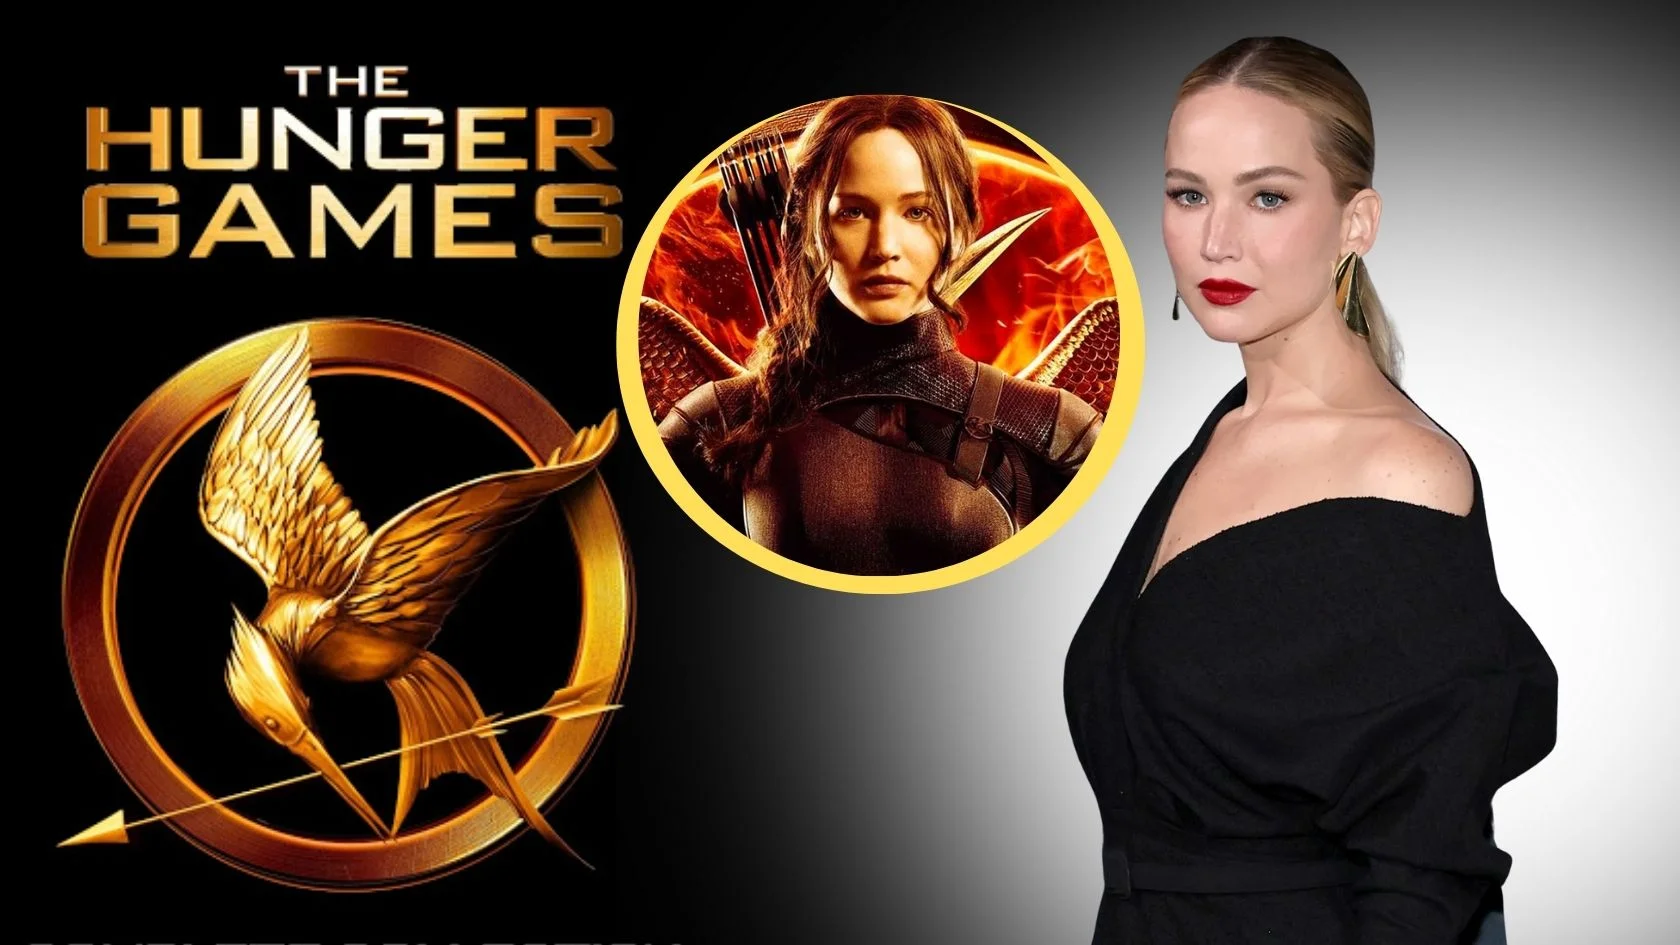 Jennifer Lawrence Revealed she hated a scene while filming Hunger Games